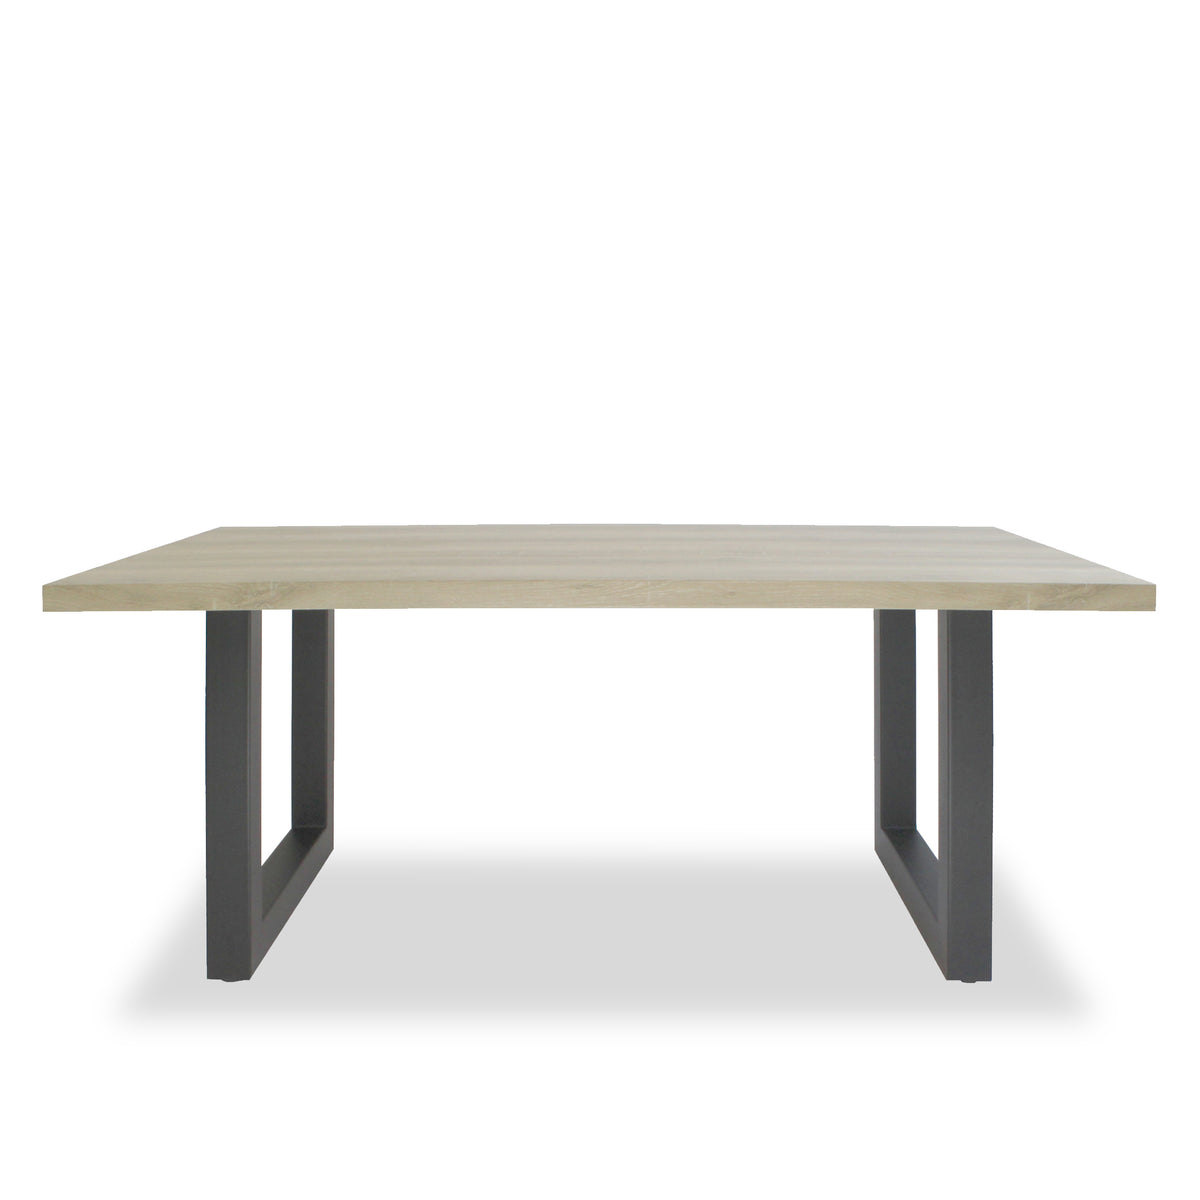 Thelma 1.8m Dining Table